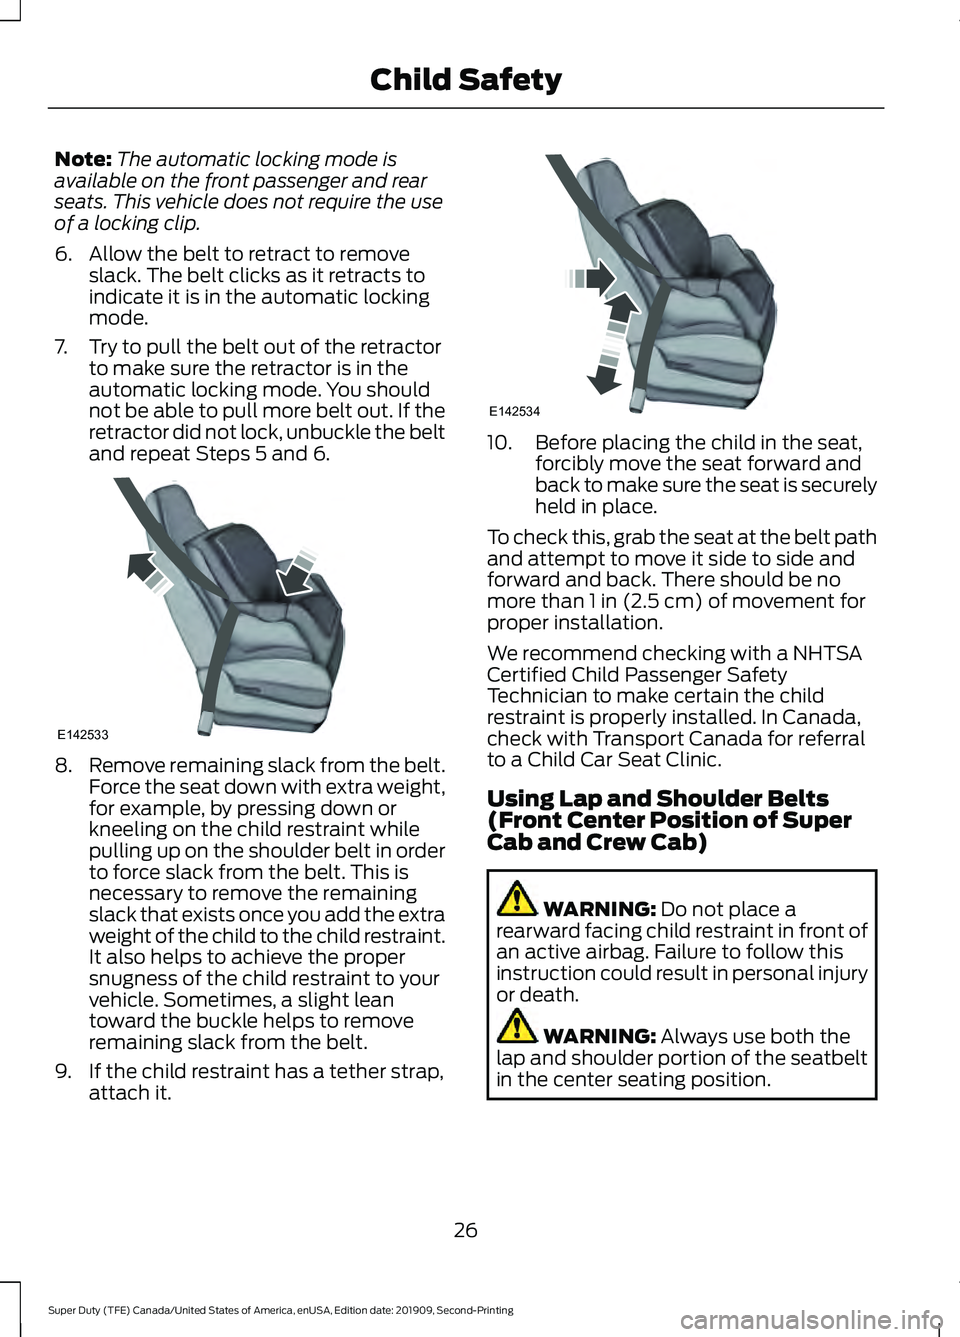 FORD F450 SUPER DUTY 2020  Owners Manual Note:
The automatic locking mode is
available on the front passenger and rear
seats. This vehicle does not require the use
of a locking clip.
6. Allow the belt to retract to remove slack. The belt cli